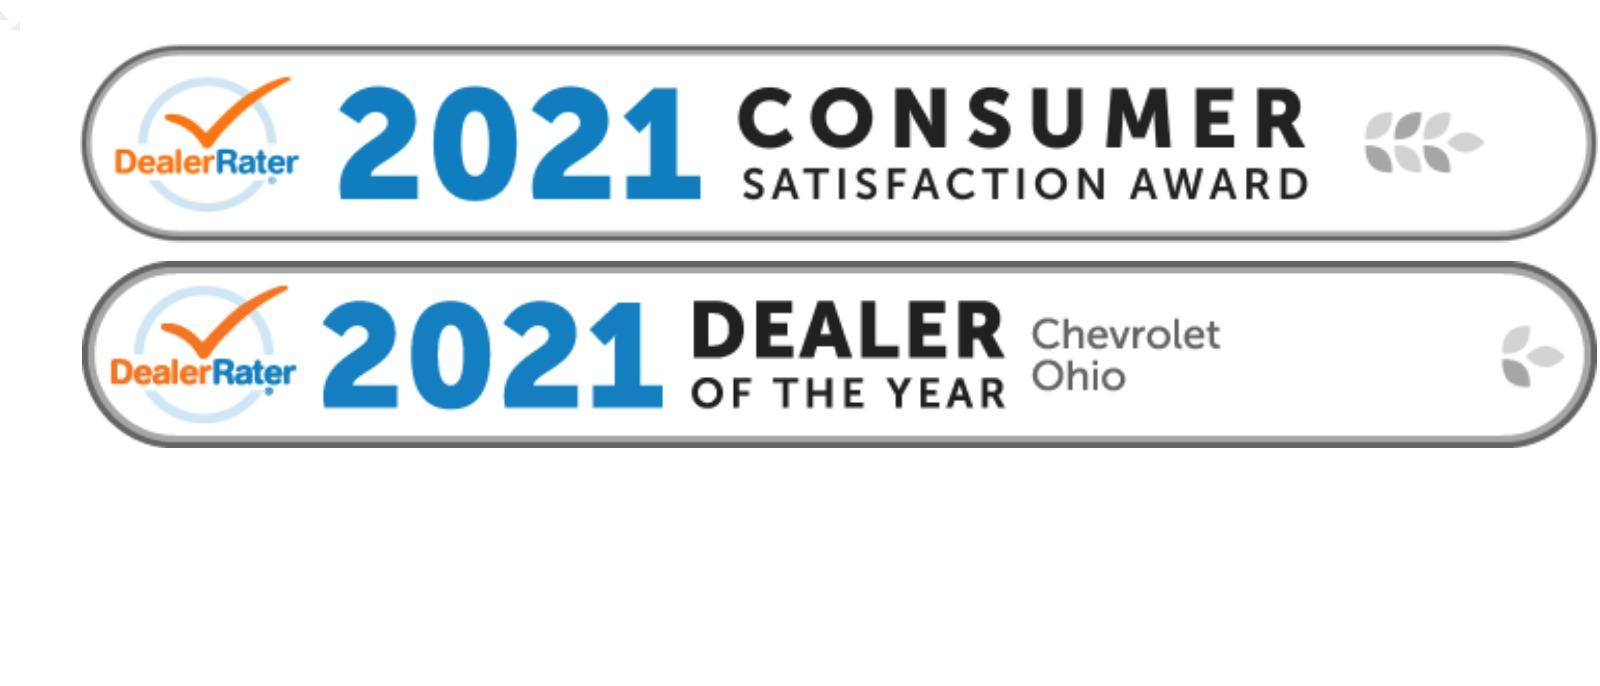 2021 Dealer of the year